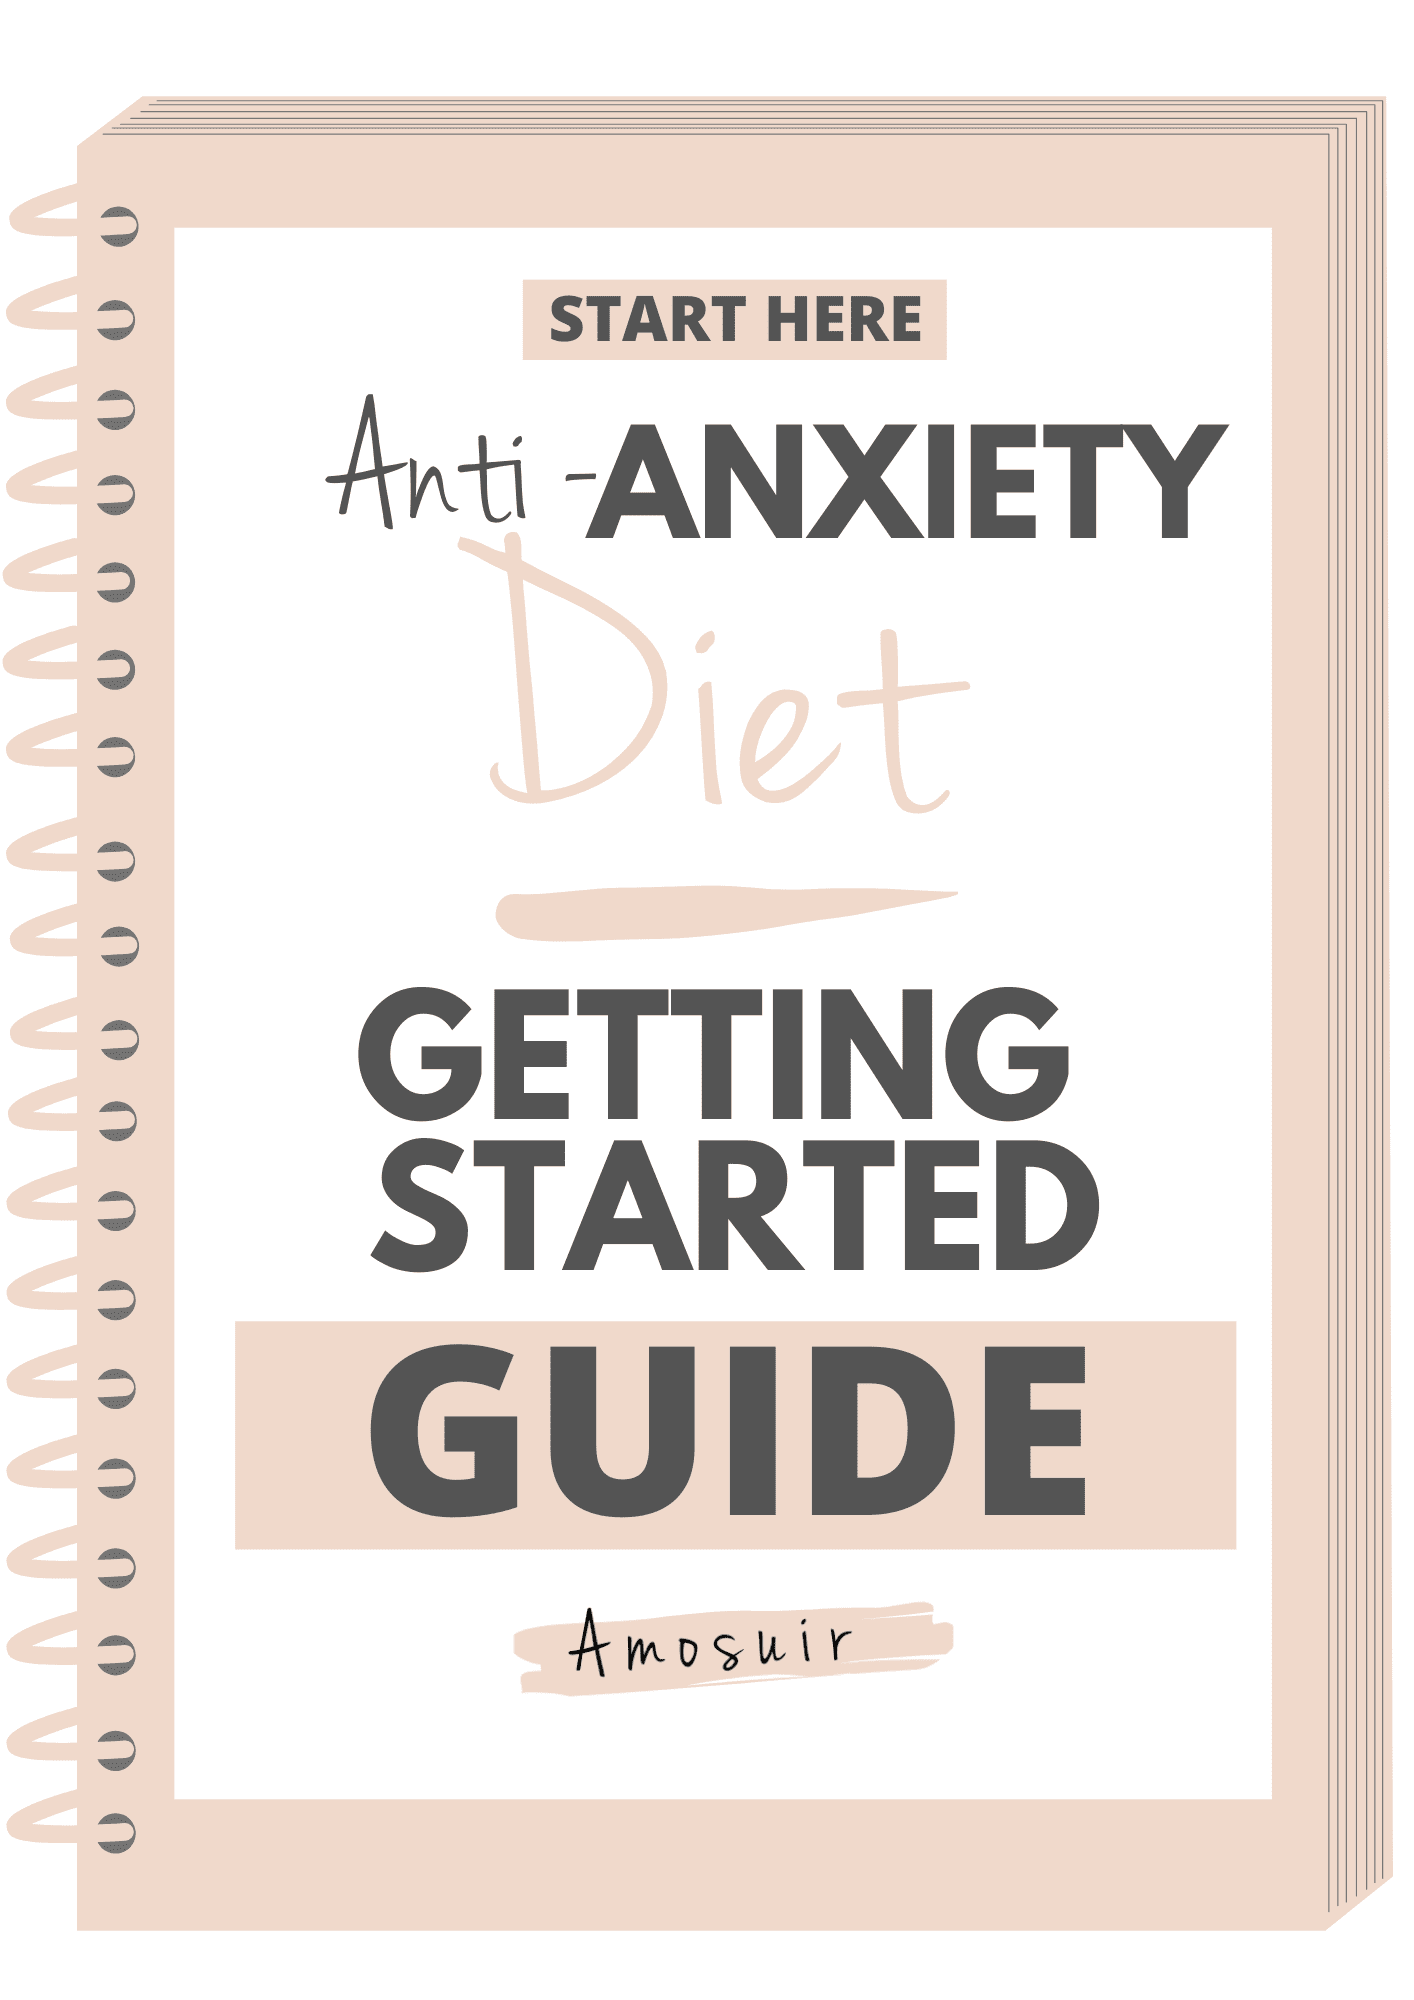 Anti-anxiety diet getting started guide front cover 3